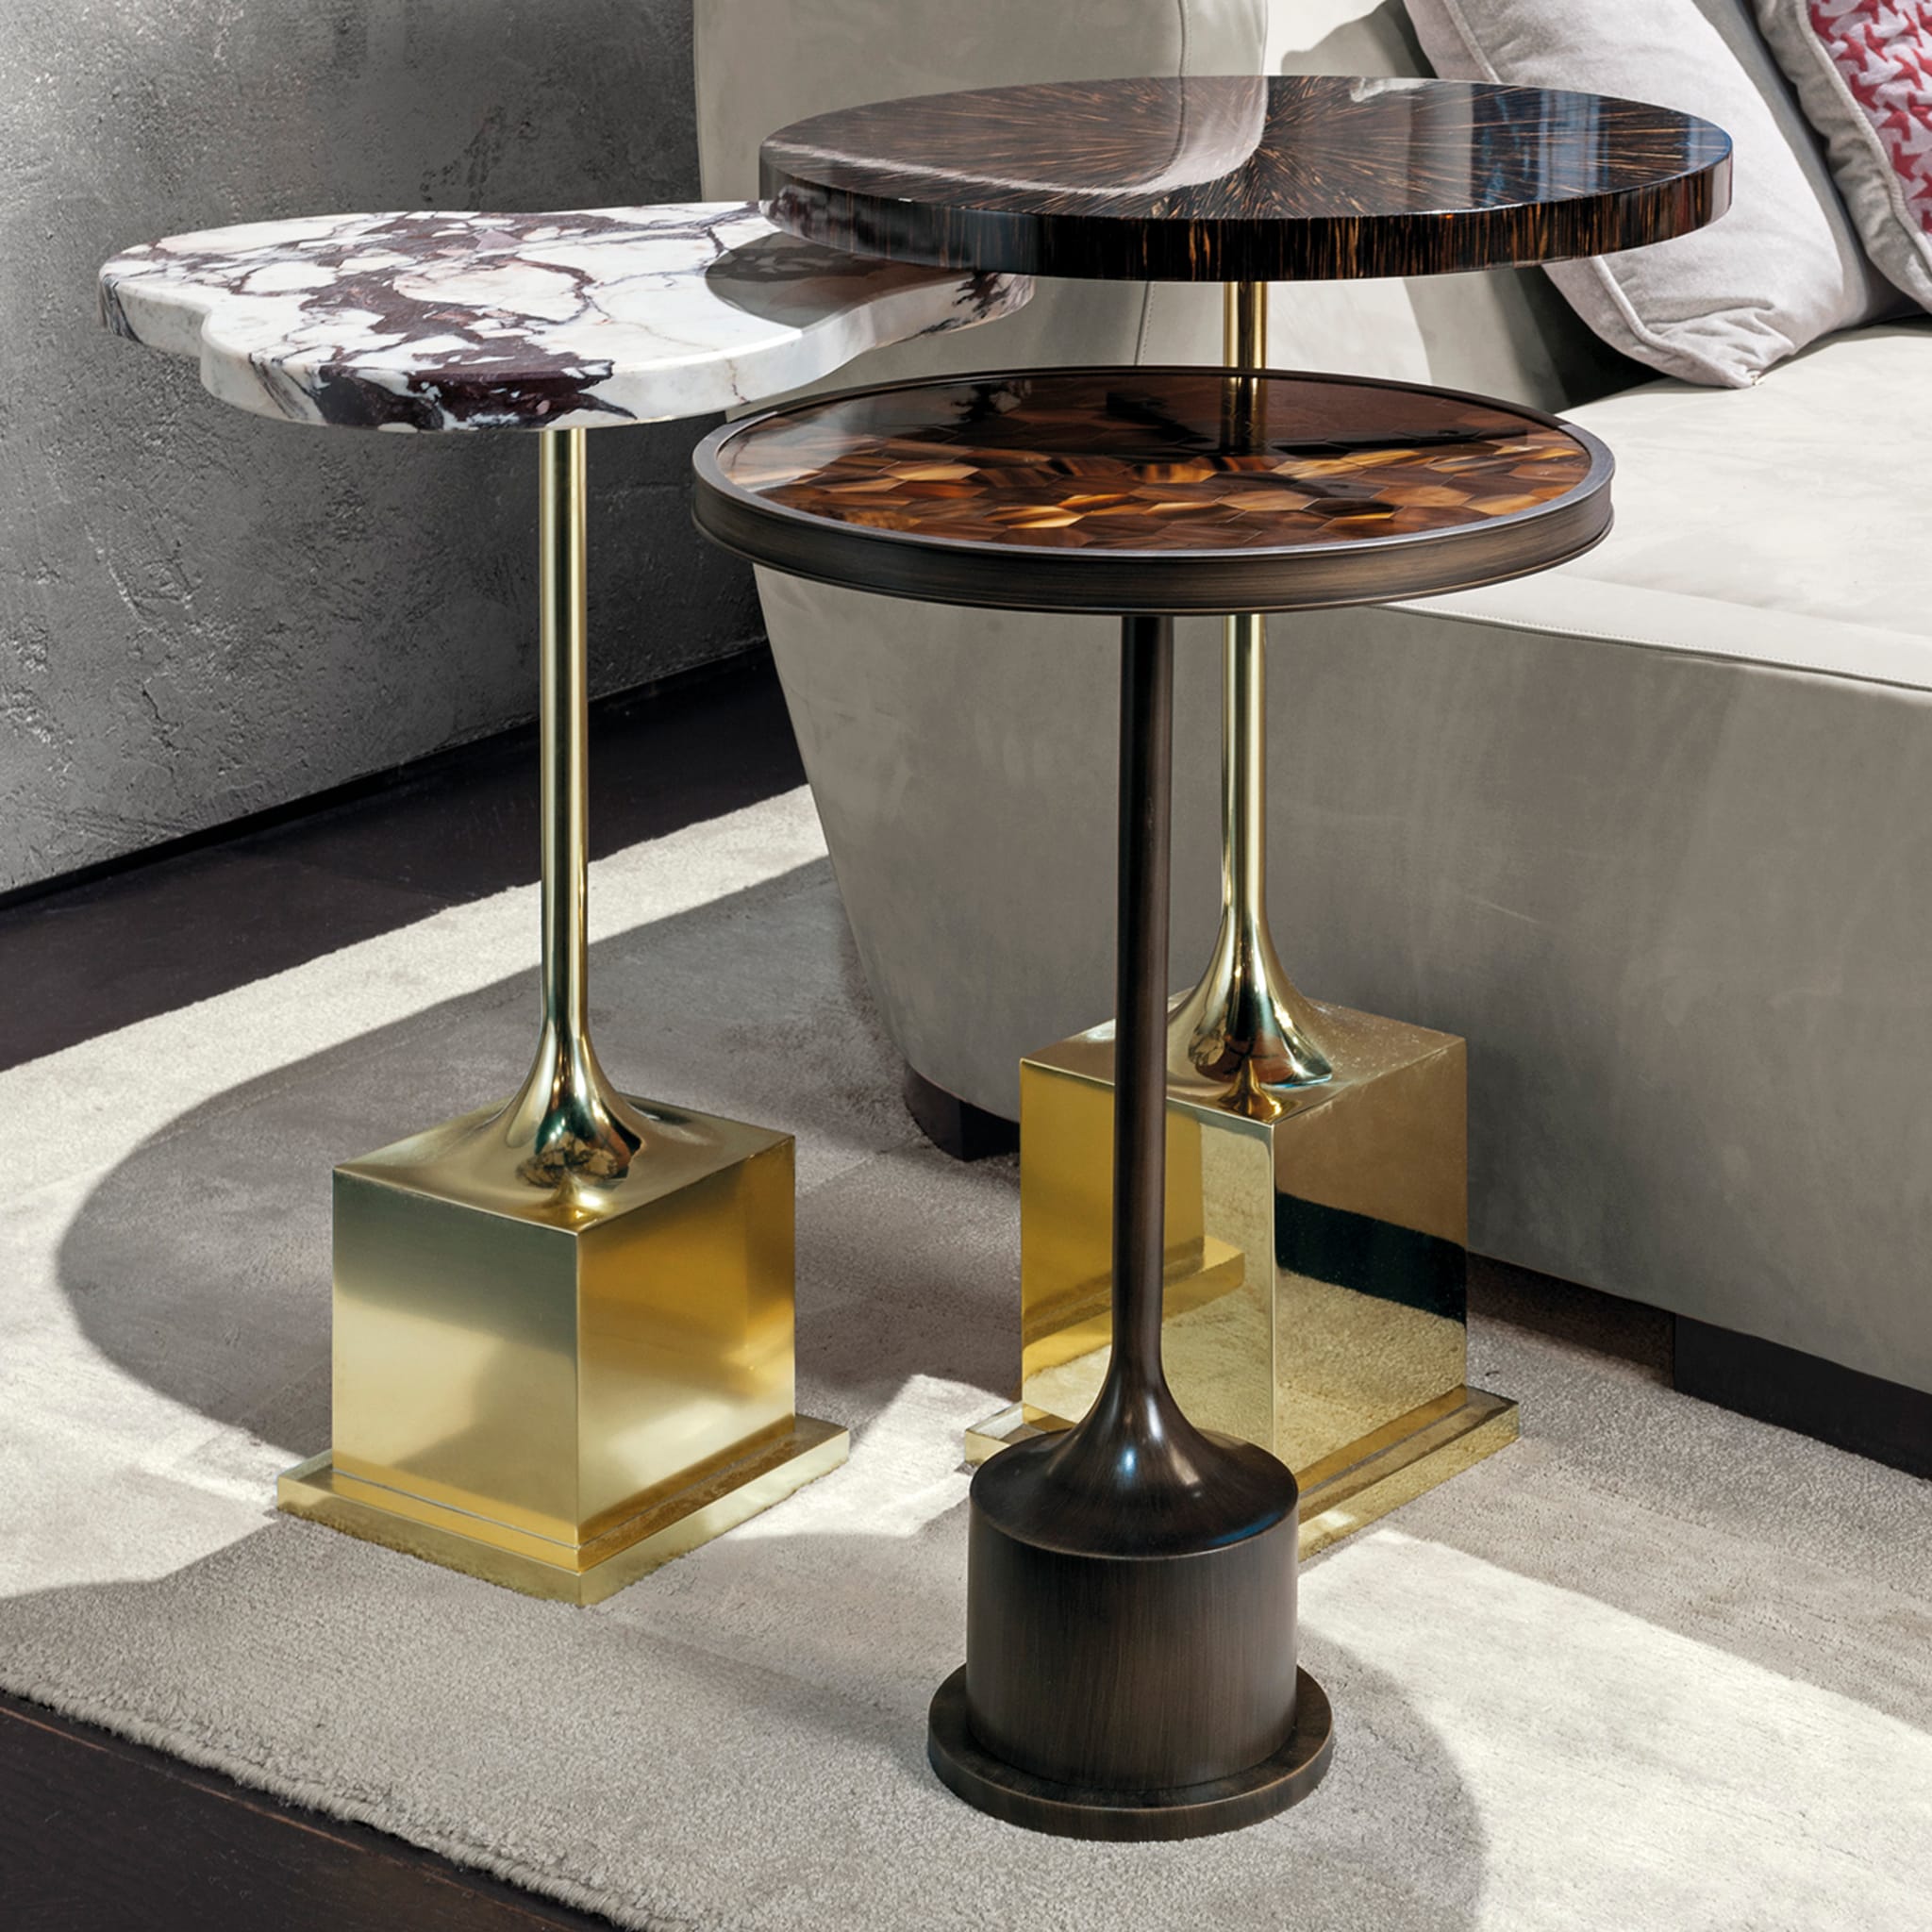 Set of 3 Side Tables - Alternative view 1